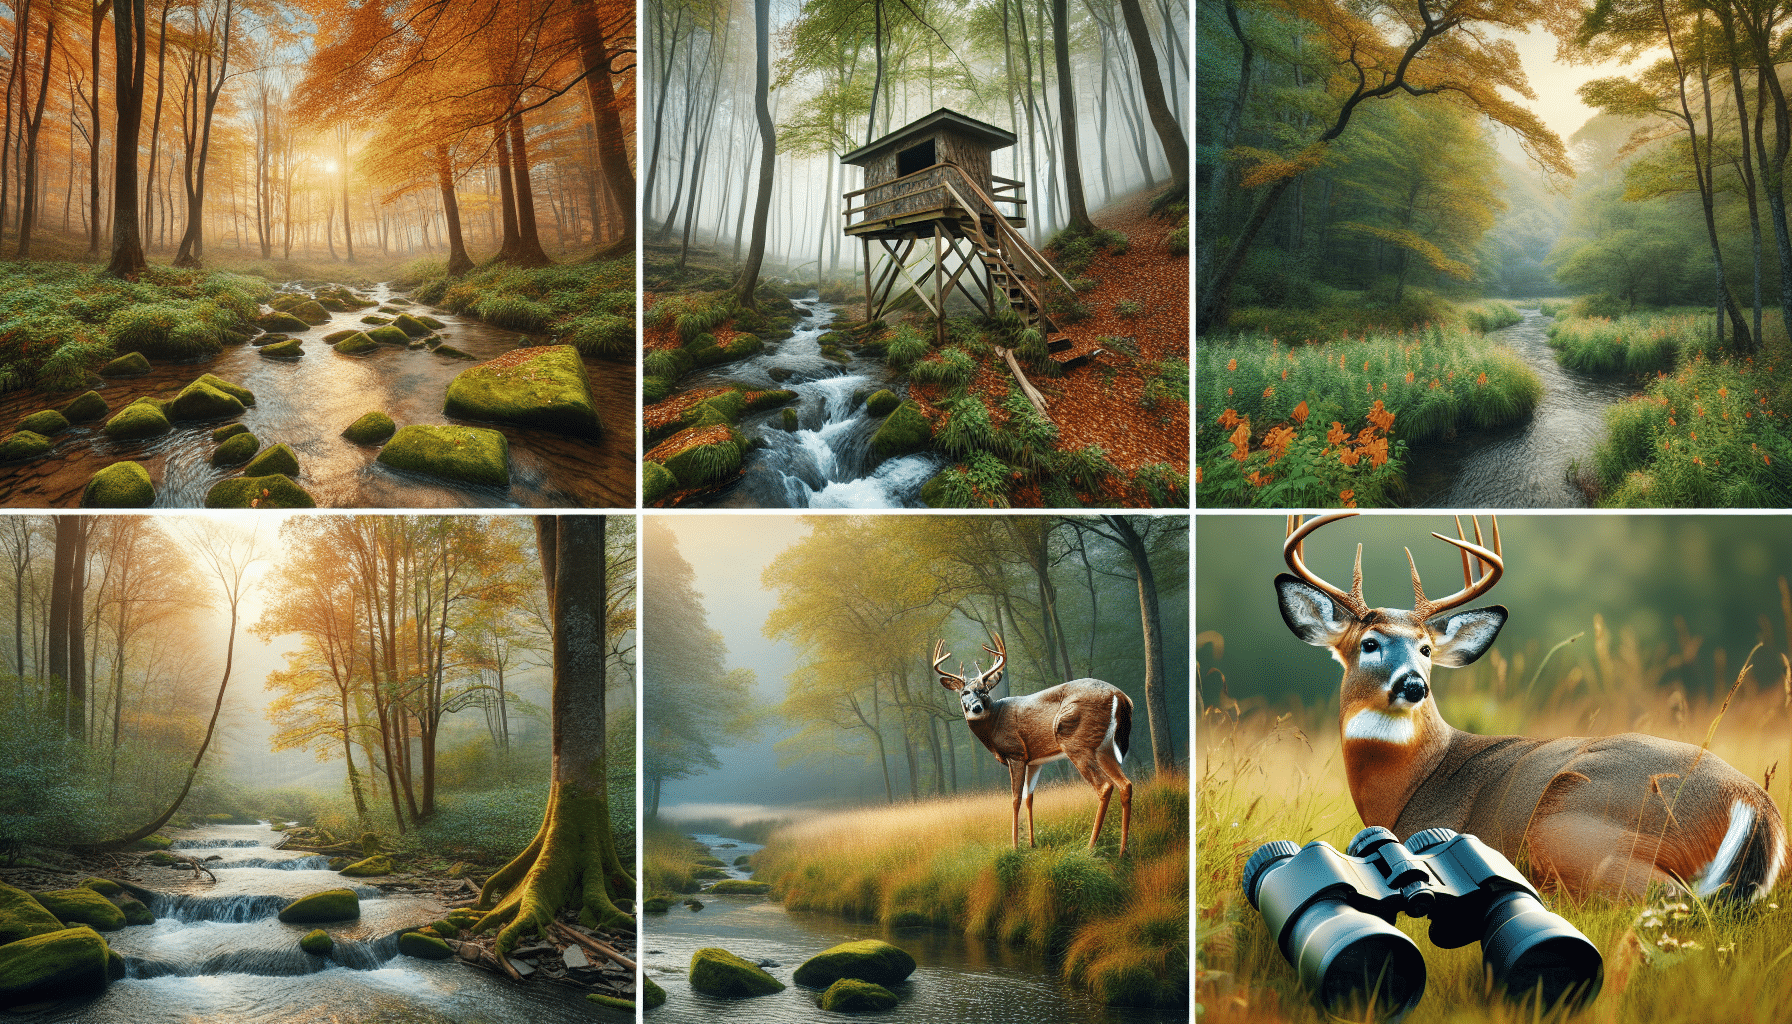 A scenic image showcasing the diverse landscape of West Virginia ideal for deer hunting. Depict a lush deciduous forest during the fall with the leaves changing colors. Show a serene early morning scene with a mist rising above a burbling stream. Include a well-camouflaged hunting stand hidden among the trees, and a pair of binoculars lying near it. Finally, reveal a deer, alert yet unaware of its surroundings, grazing nonchalantly in a grassy clearing. The surroundings should be devoid of any human presence.